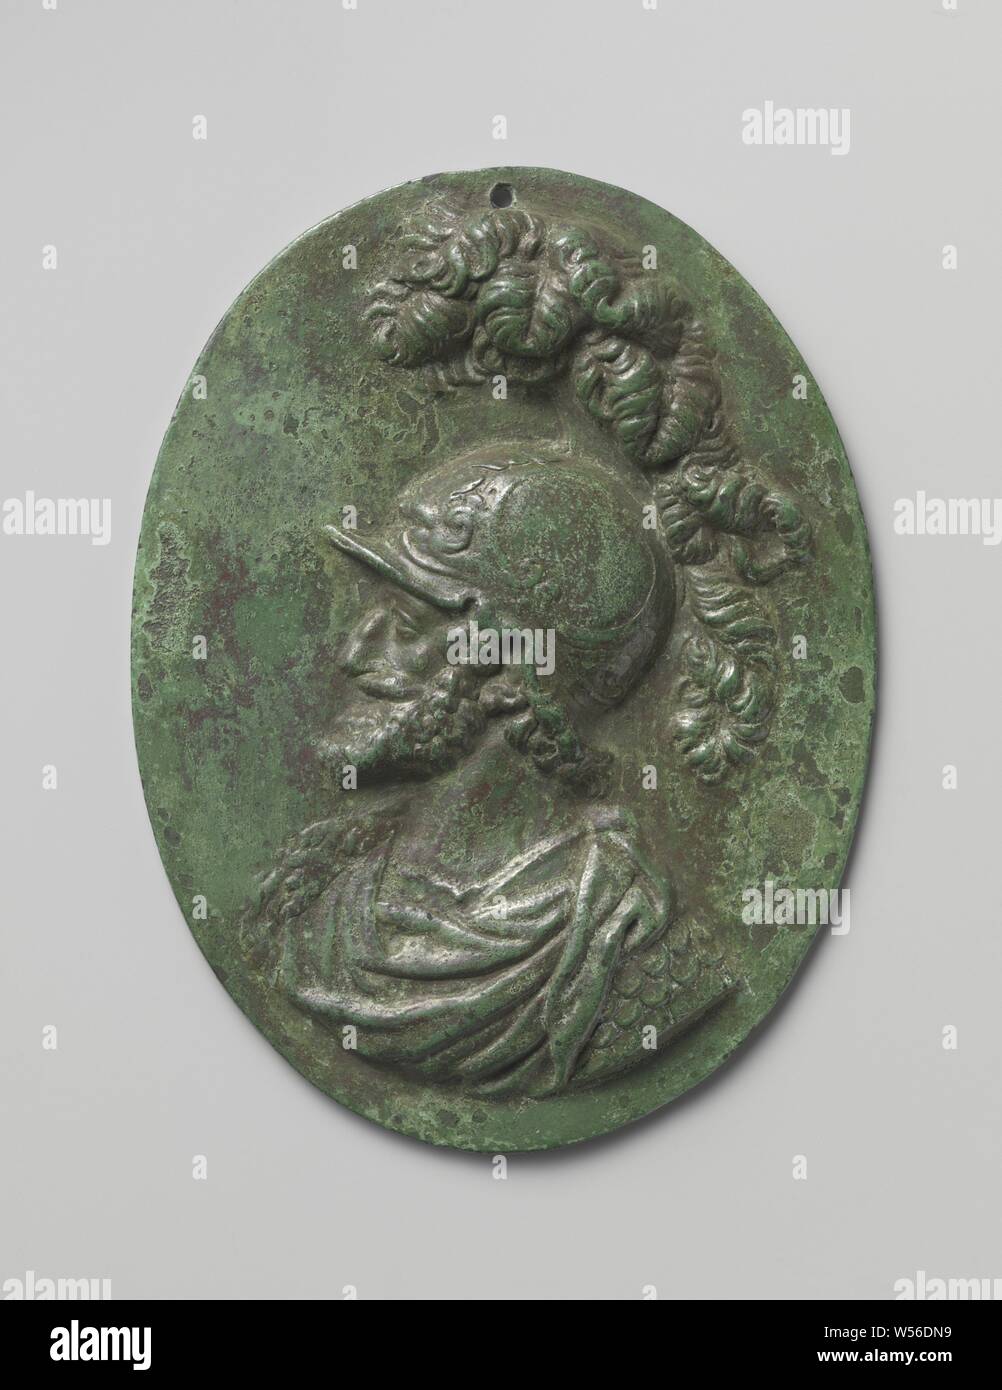 Medallion portrait of Henry IV of France (1553-1610), Henry IV of France, in profile to the left, dressed in a Roman costume with a feathered helmet, Henry IV (King of France and Navarre), anonymous, France, c. 1700 - c. 1800, bronze (metal), h 12.7 cm × w 9.7 cm × d 0.3 cm Stock Photo